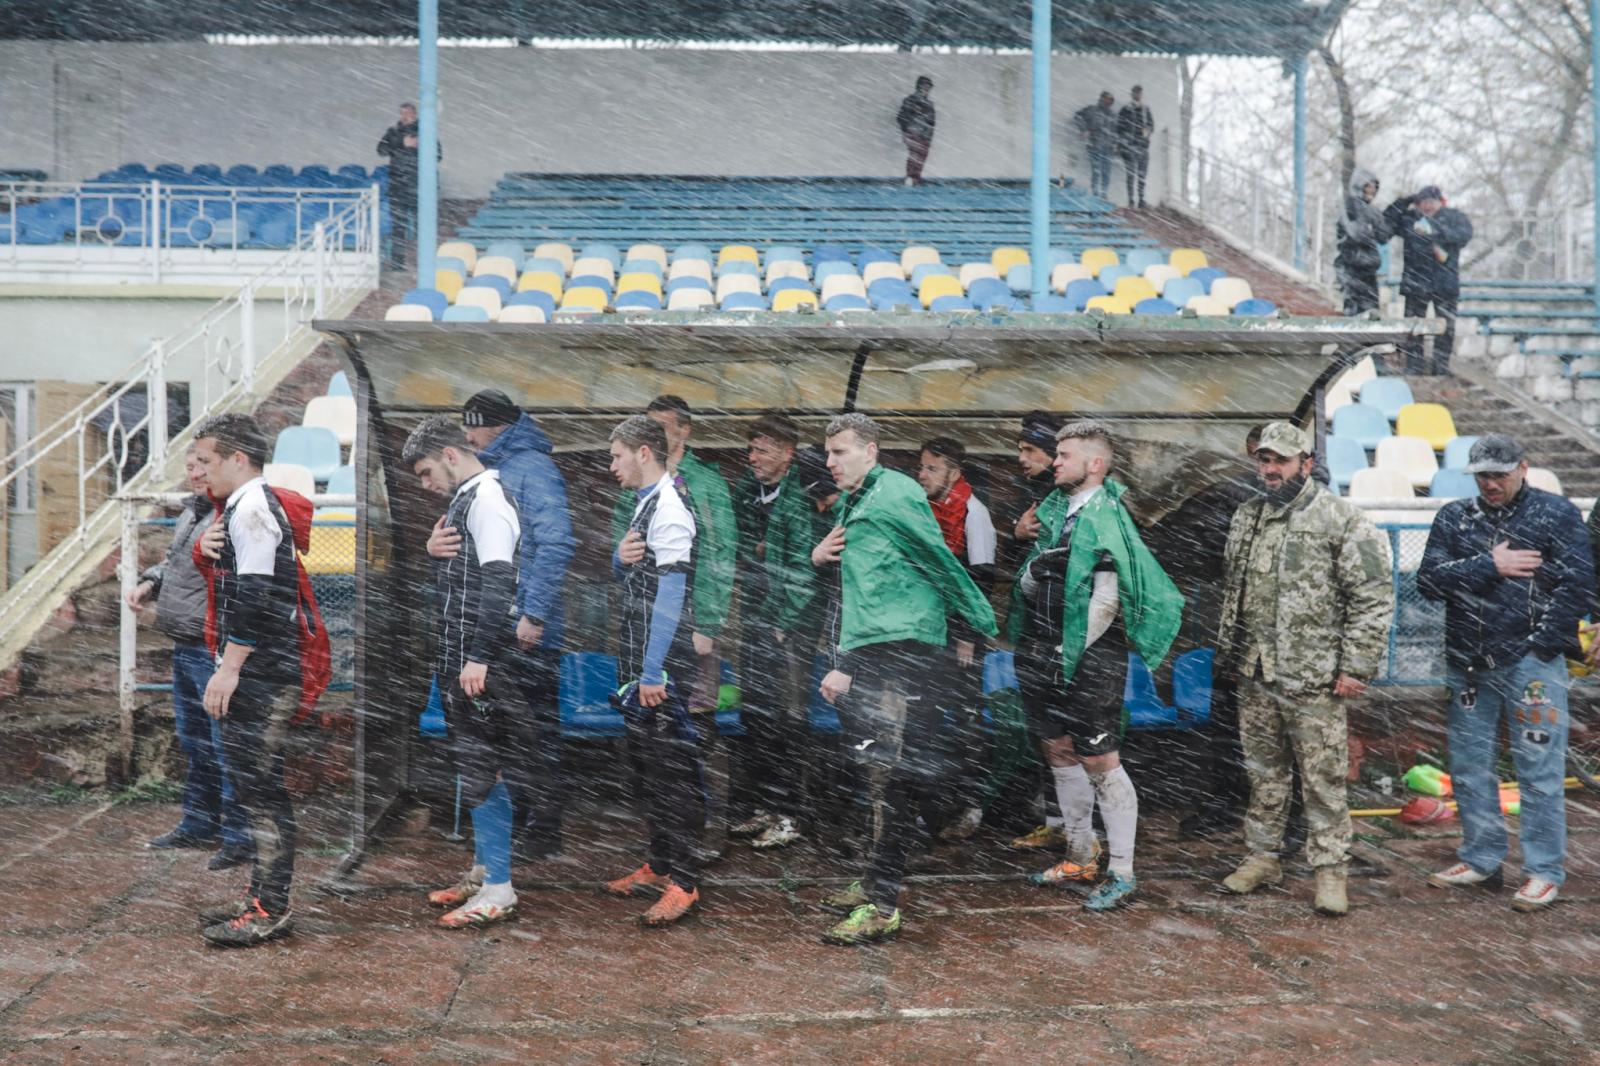 April 17, 2022. Ivanofranki First vestige of football in Ukraine after more than 50 days of war....